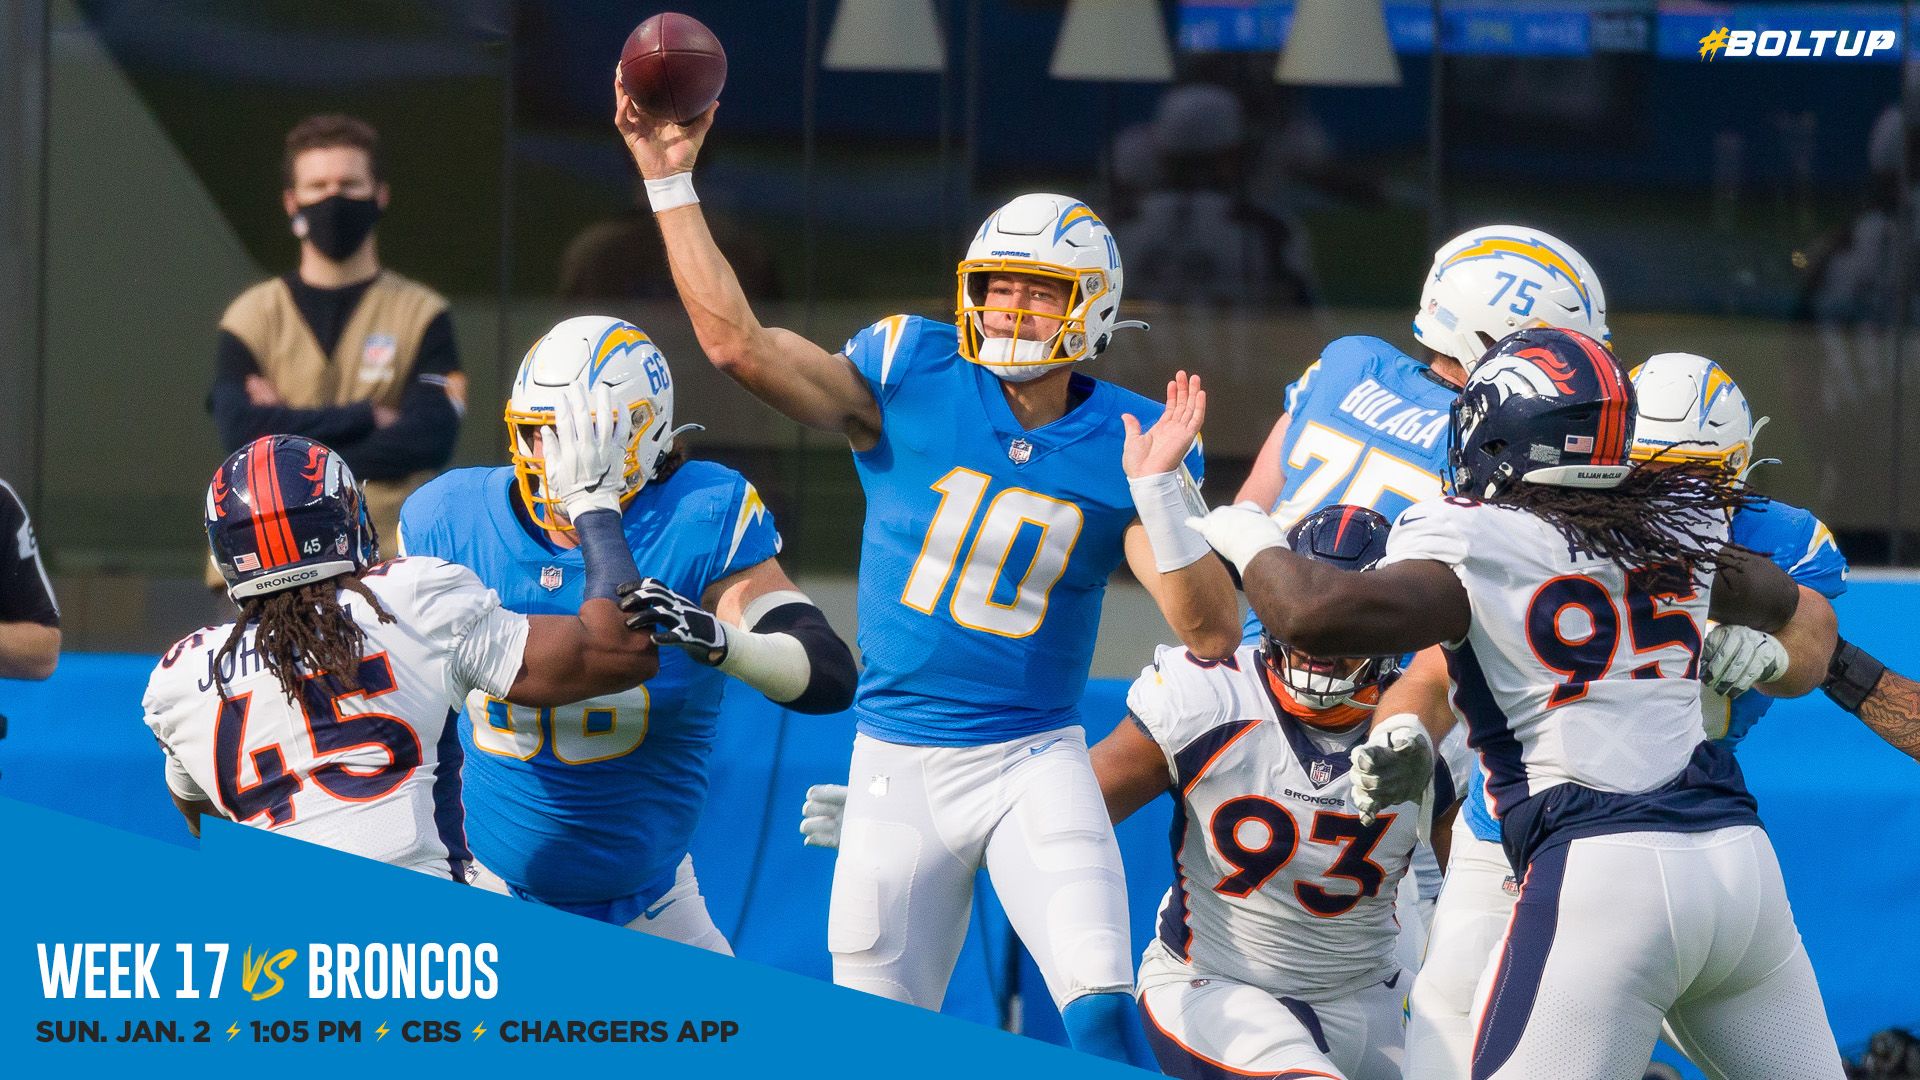 Denver Broncos at Los Angeles Chargers on January 2, 2021